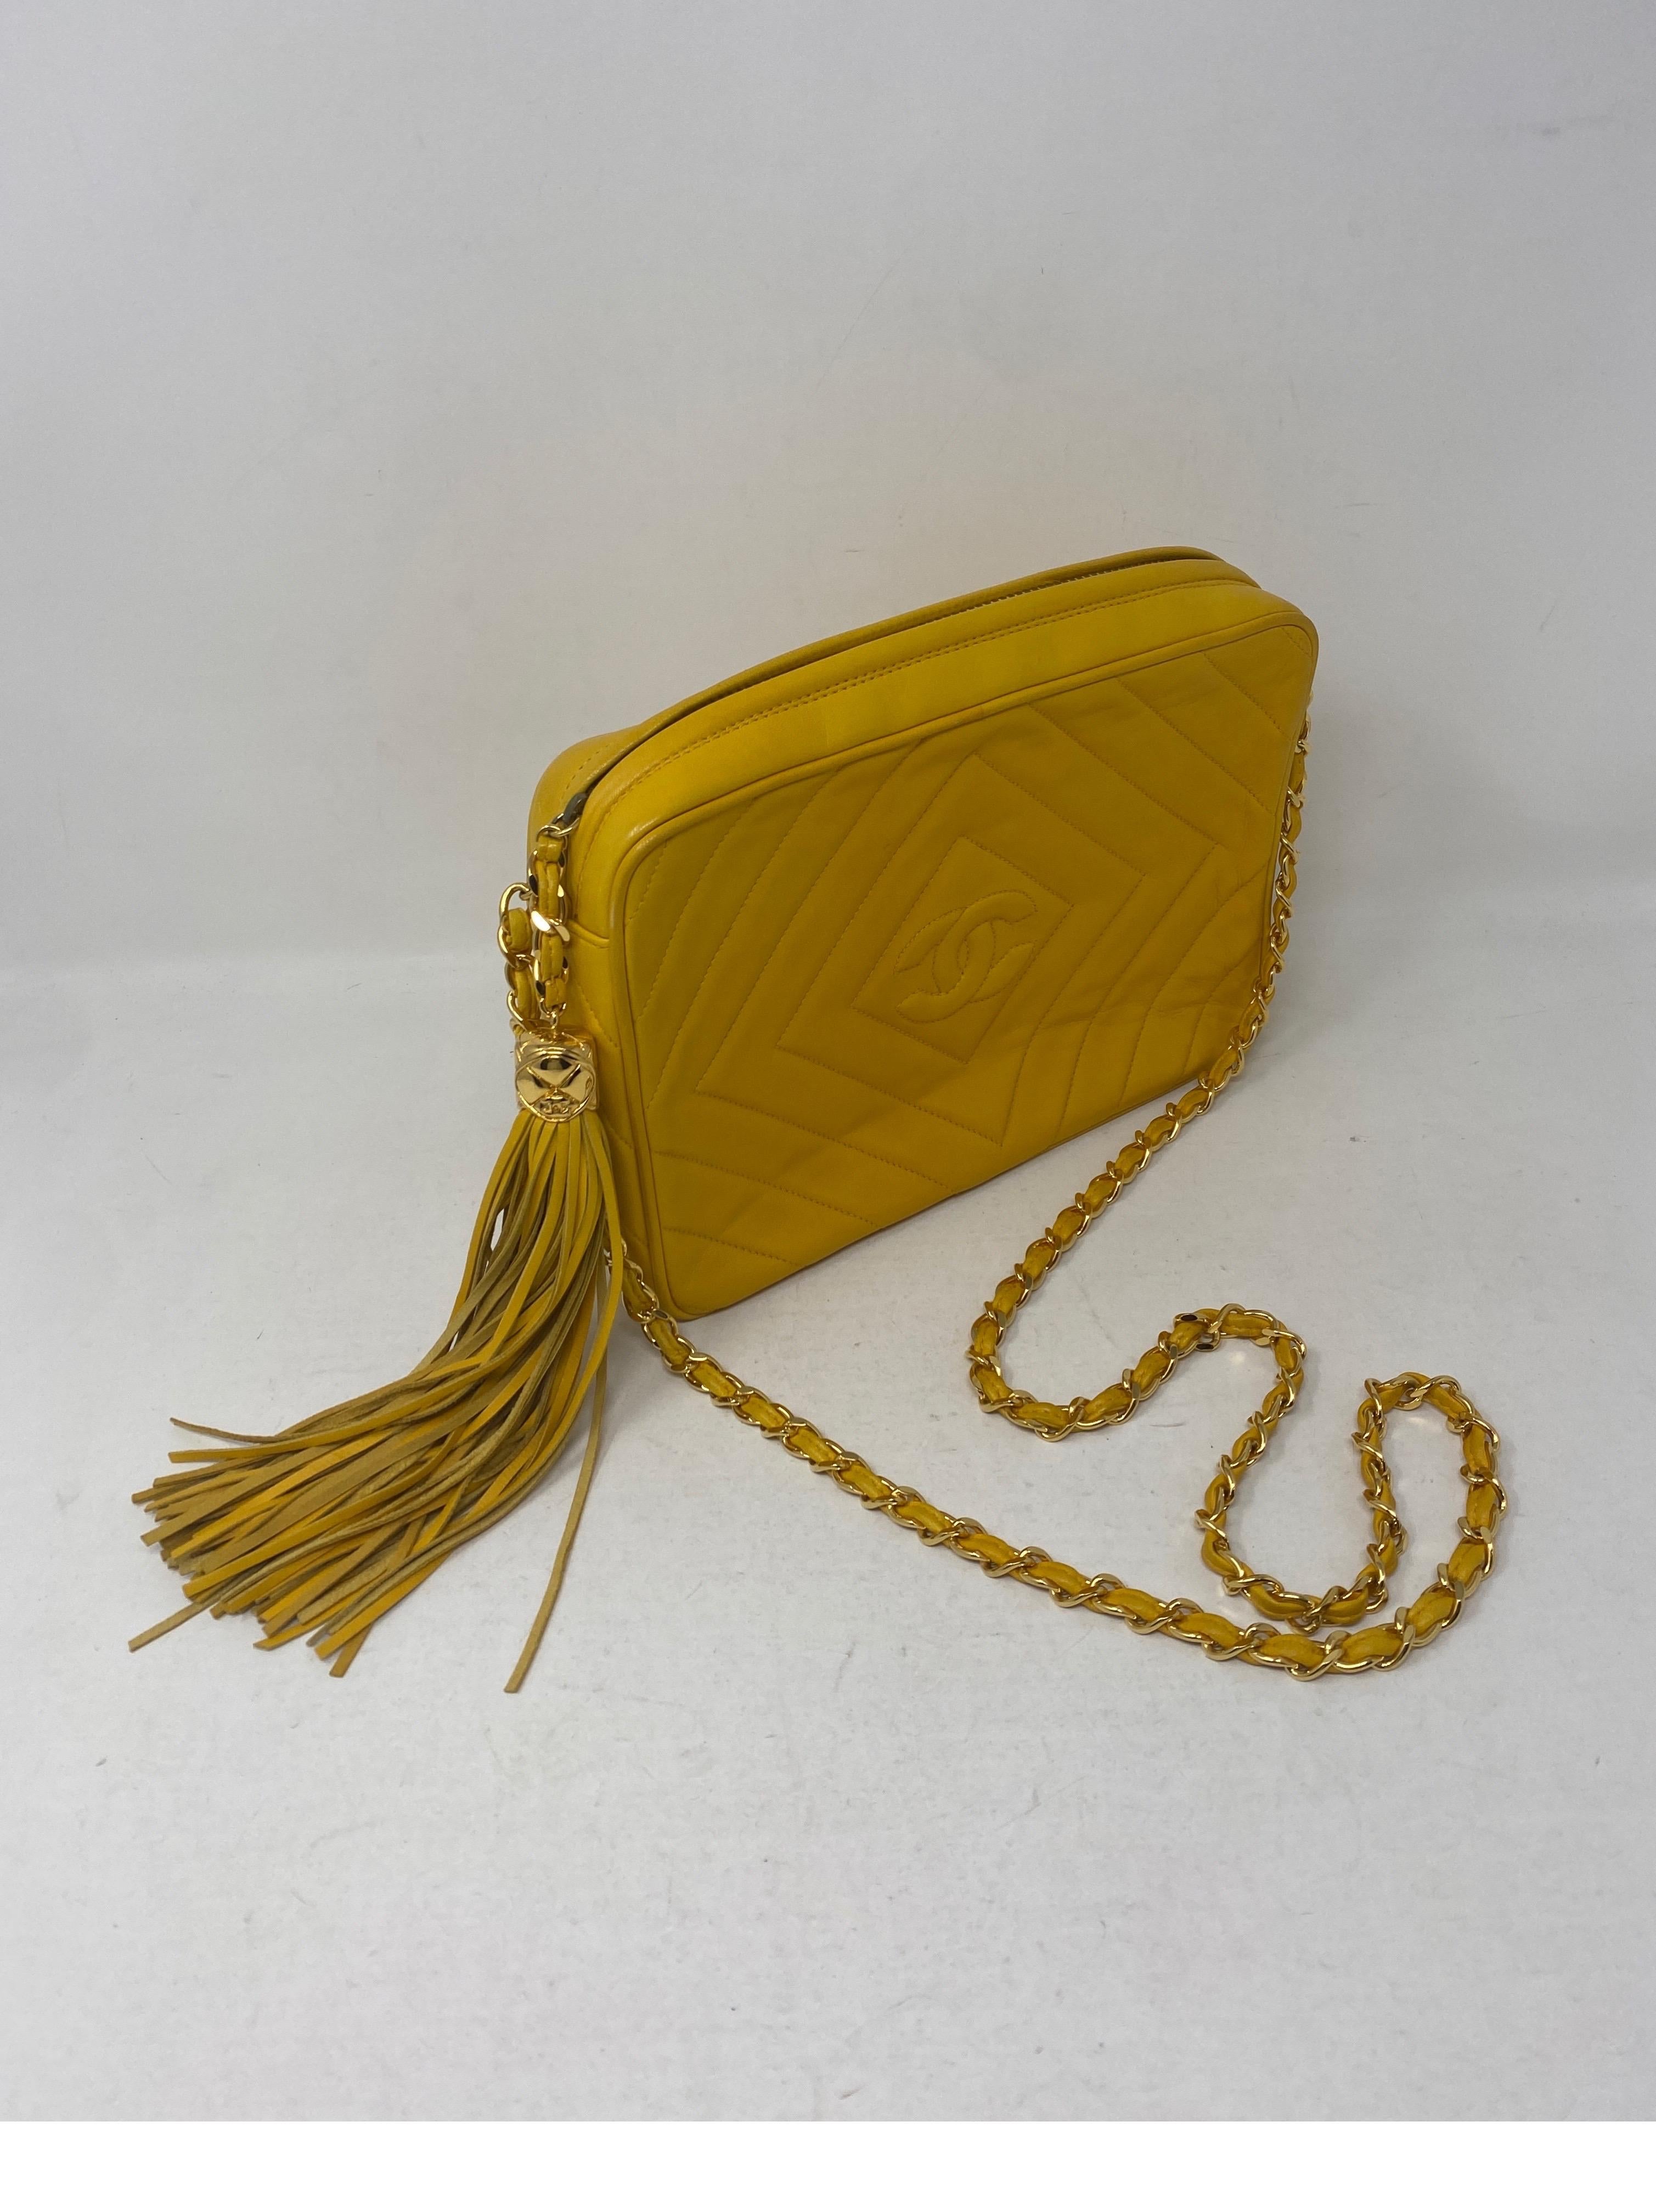 Chanel Yellow Vintage Bag. Tassel Camera Bag. Gold hardware. Bright yellow color. Lambskin leather. Can be worn crossbody. Excellent condition. Includes authenticity card. Guaranteed authentic. 